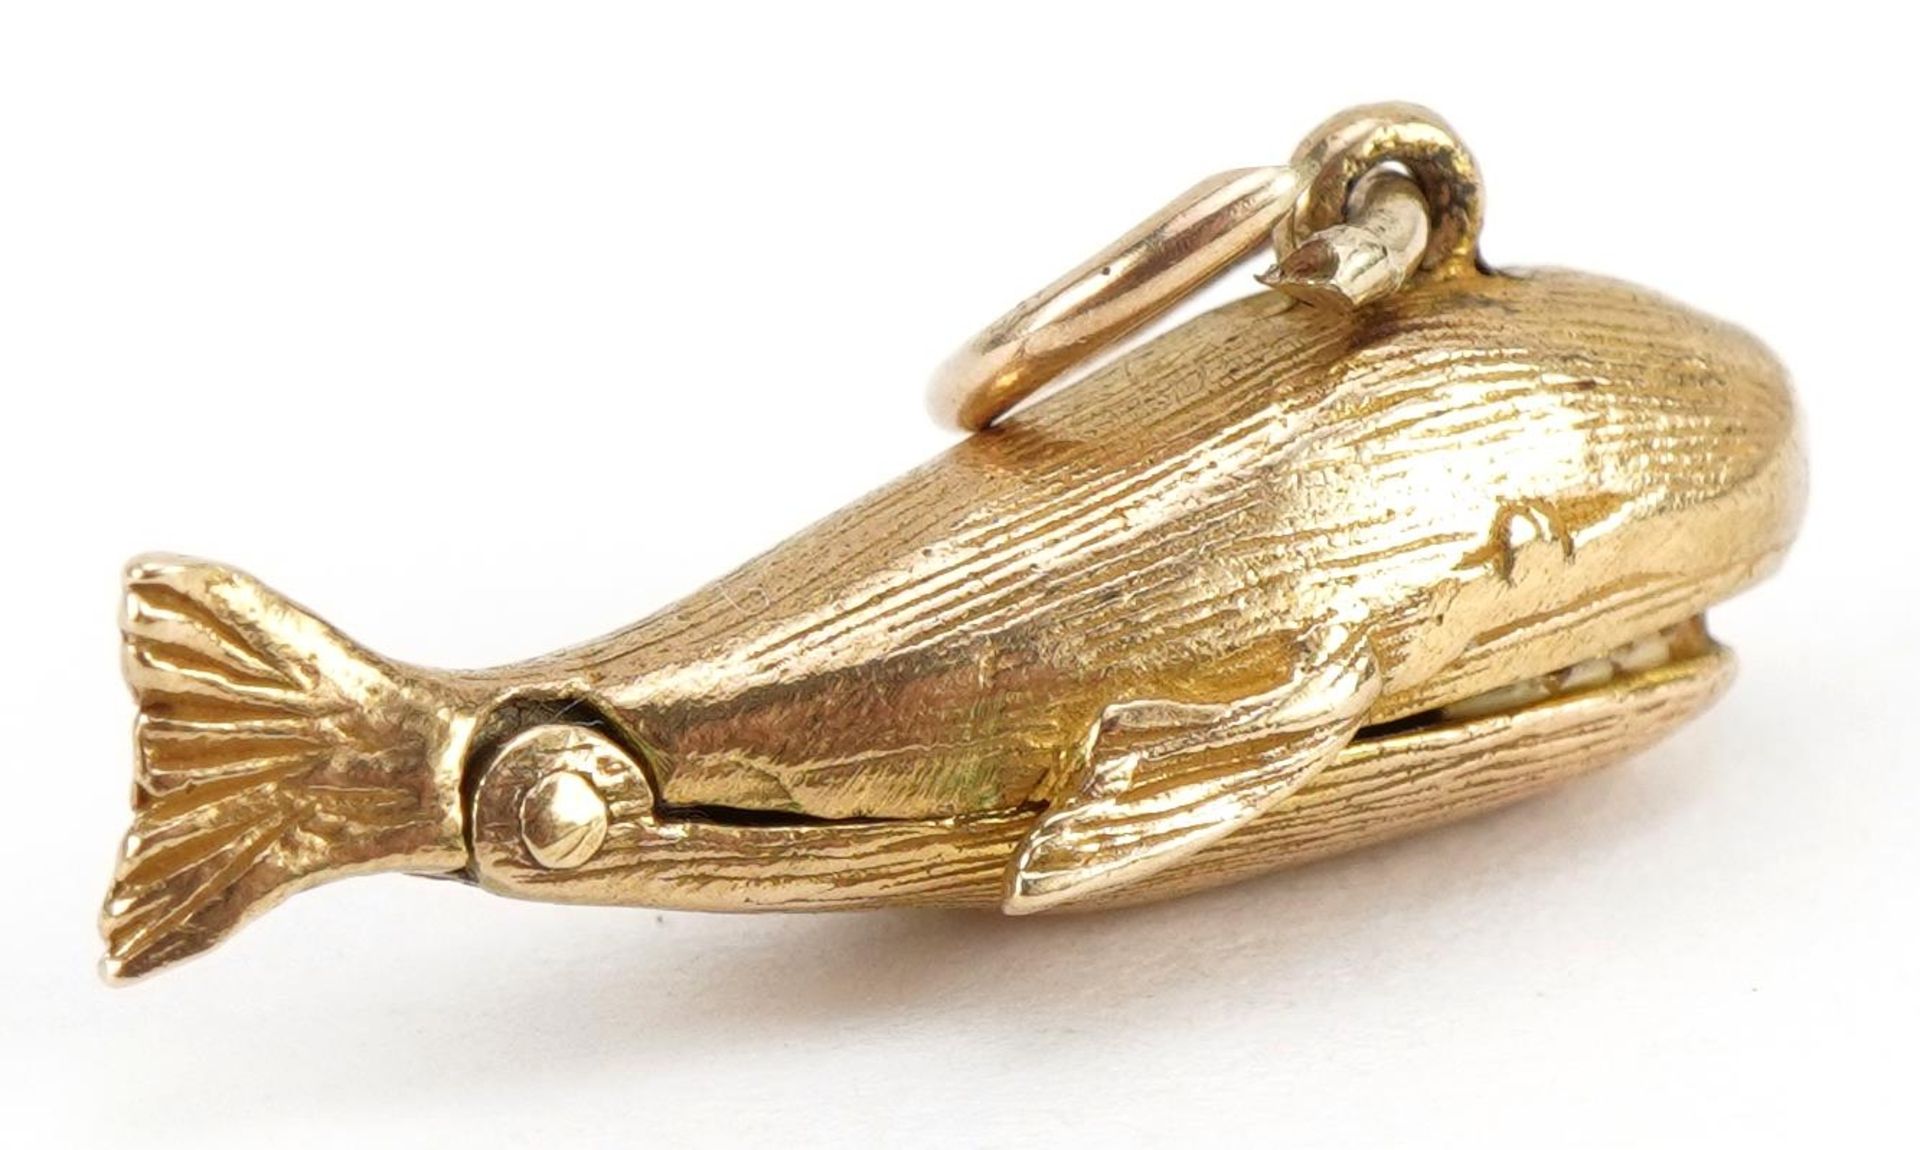 9ct gold whale charm with hinged mouth opening to reveal an enamelled figure, 2.3cm wide, 2.7g - Image 2 of 4